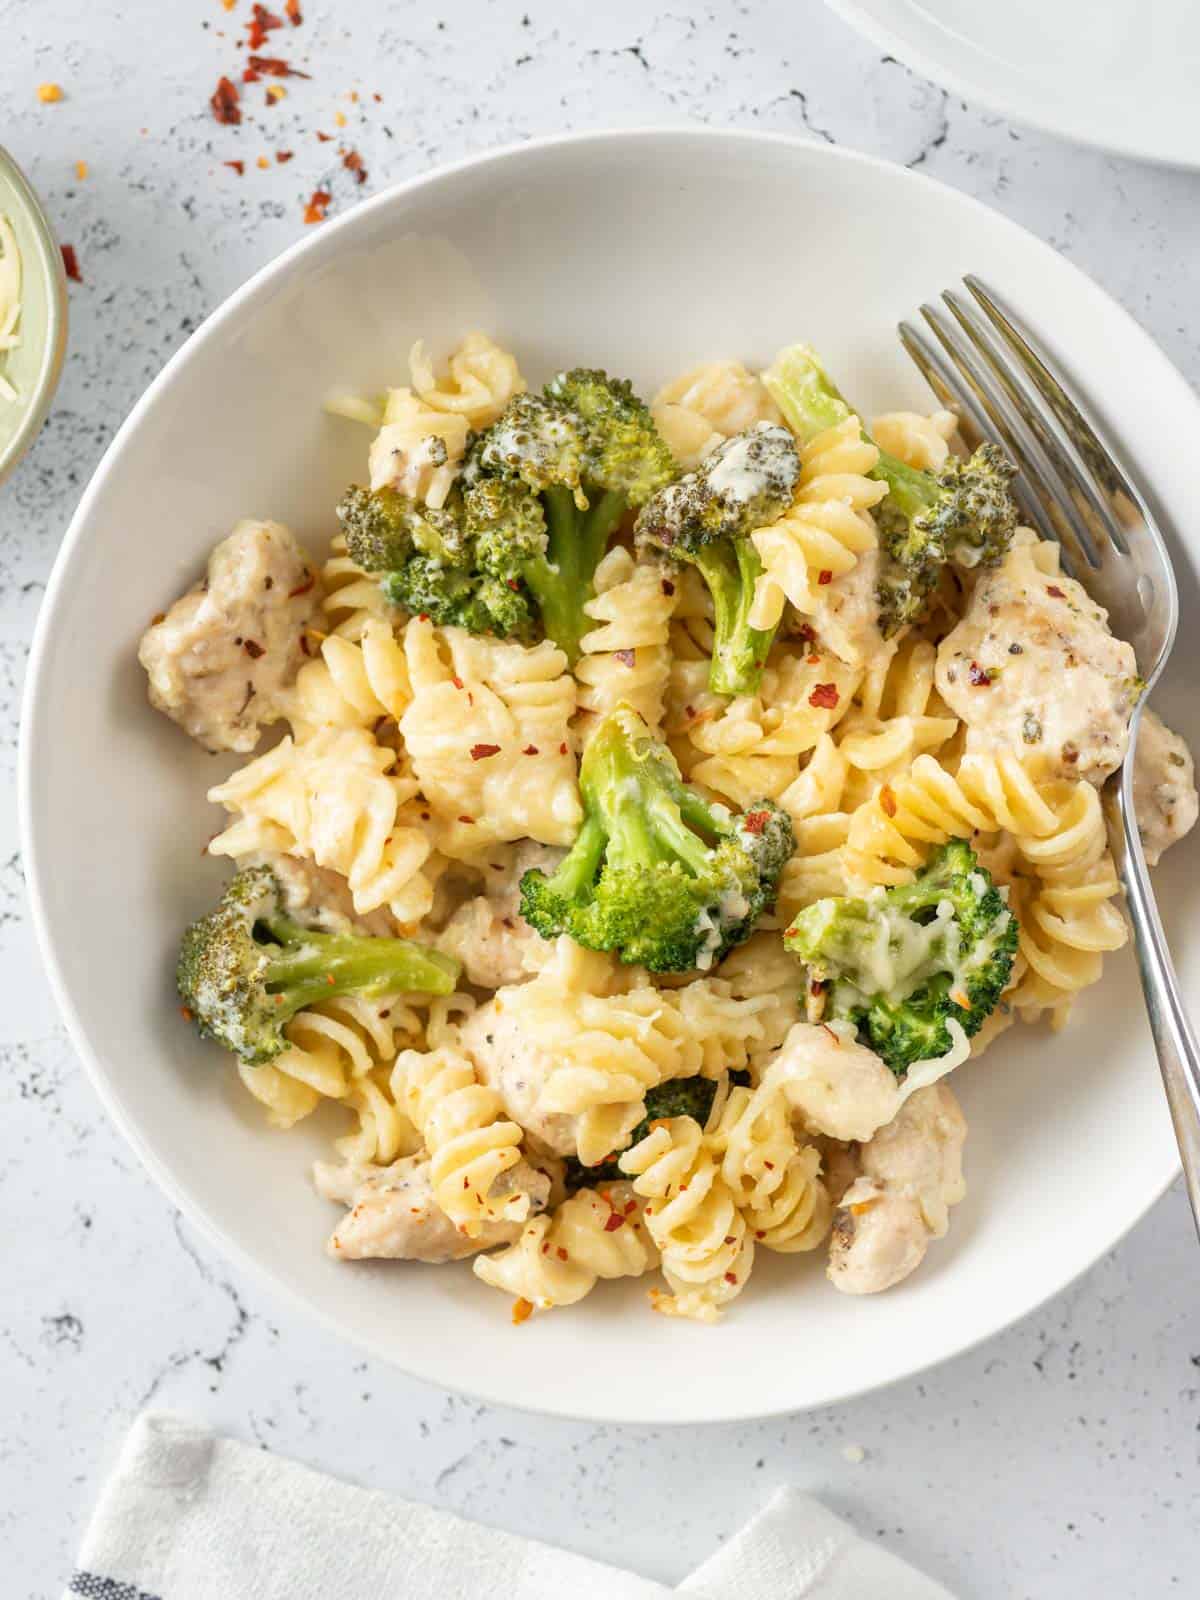 a fork paid on the side of the pasta and broccoli dish on a plate